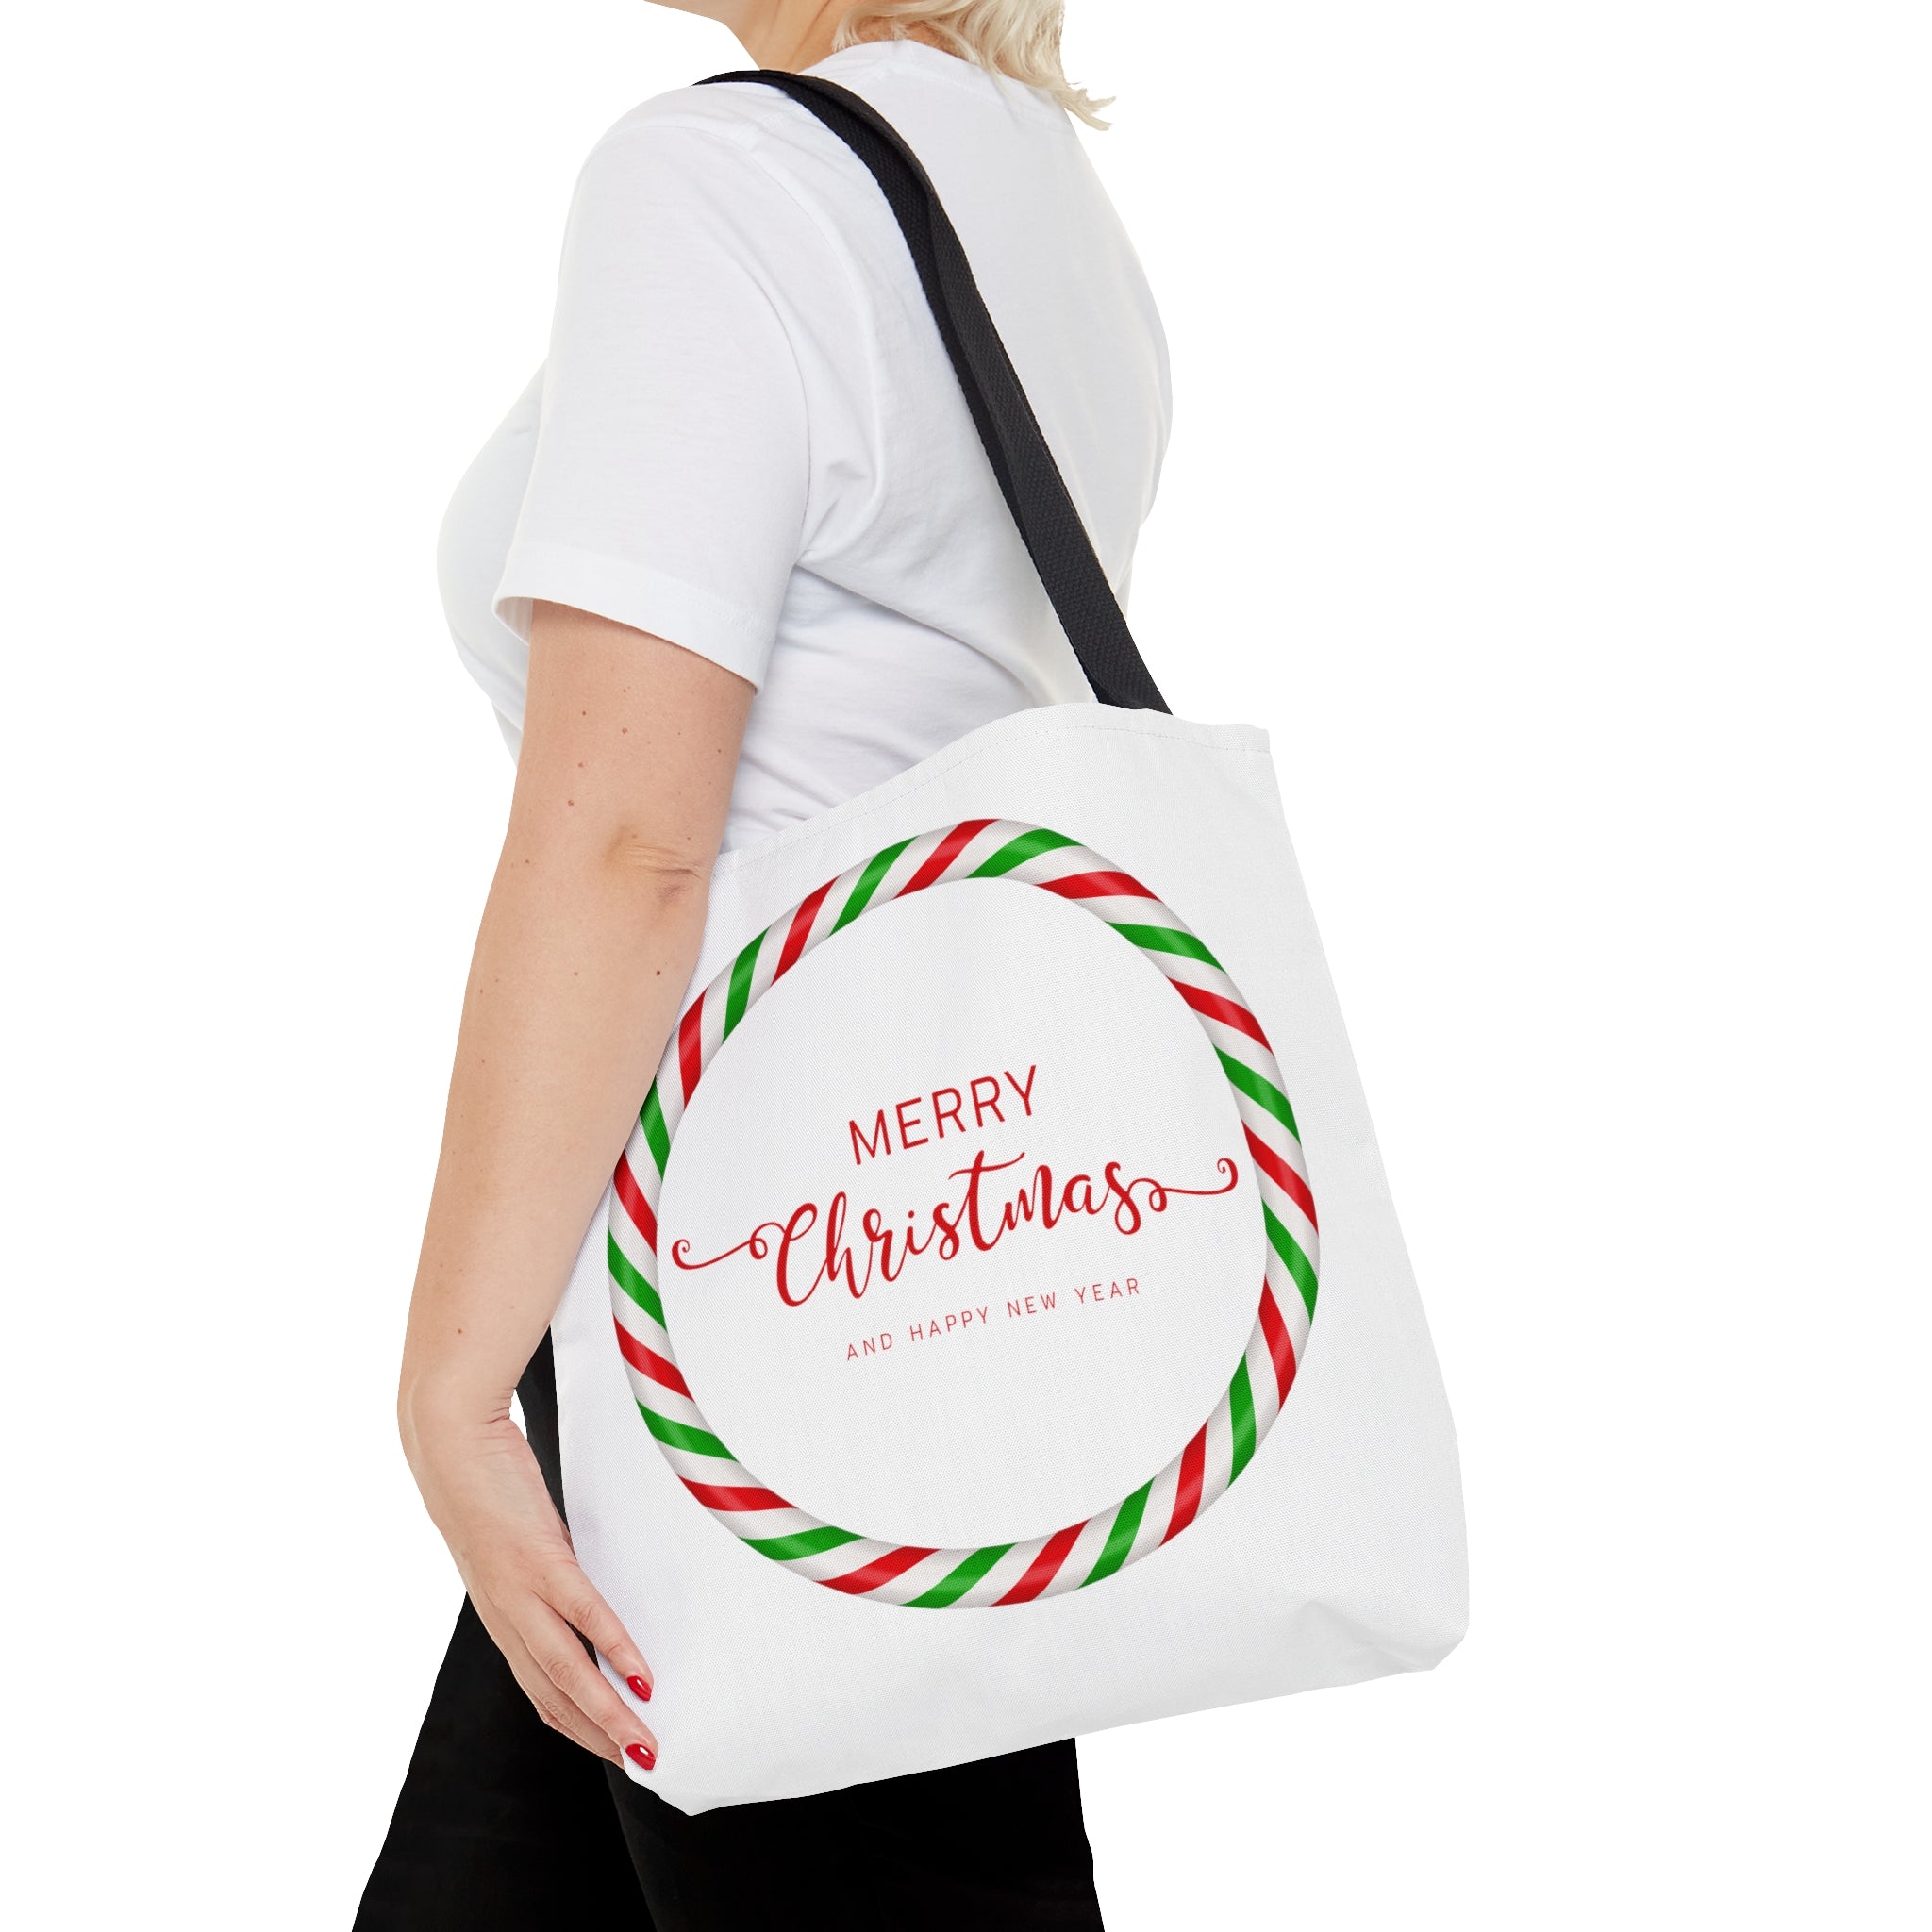 Merry Christmas Tote Bag, Reusable Canvas Tote Bags, Available in Different Size